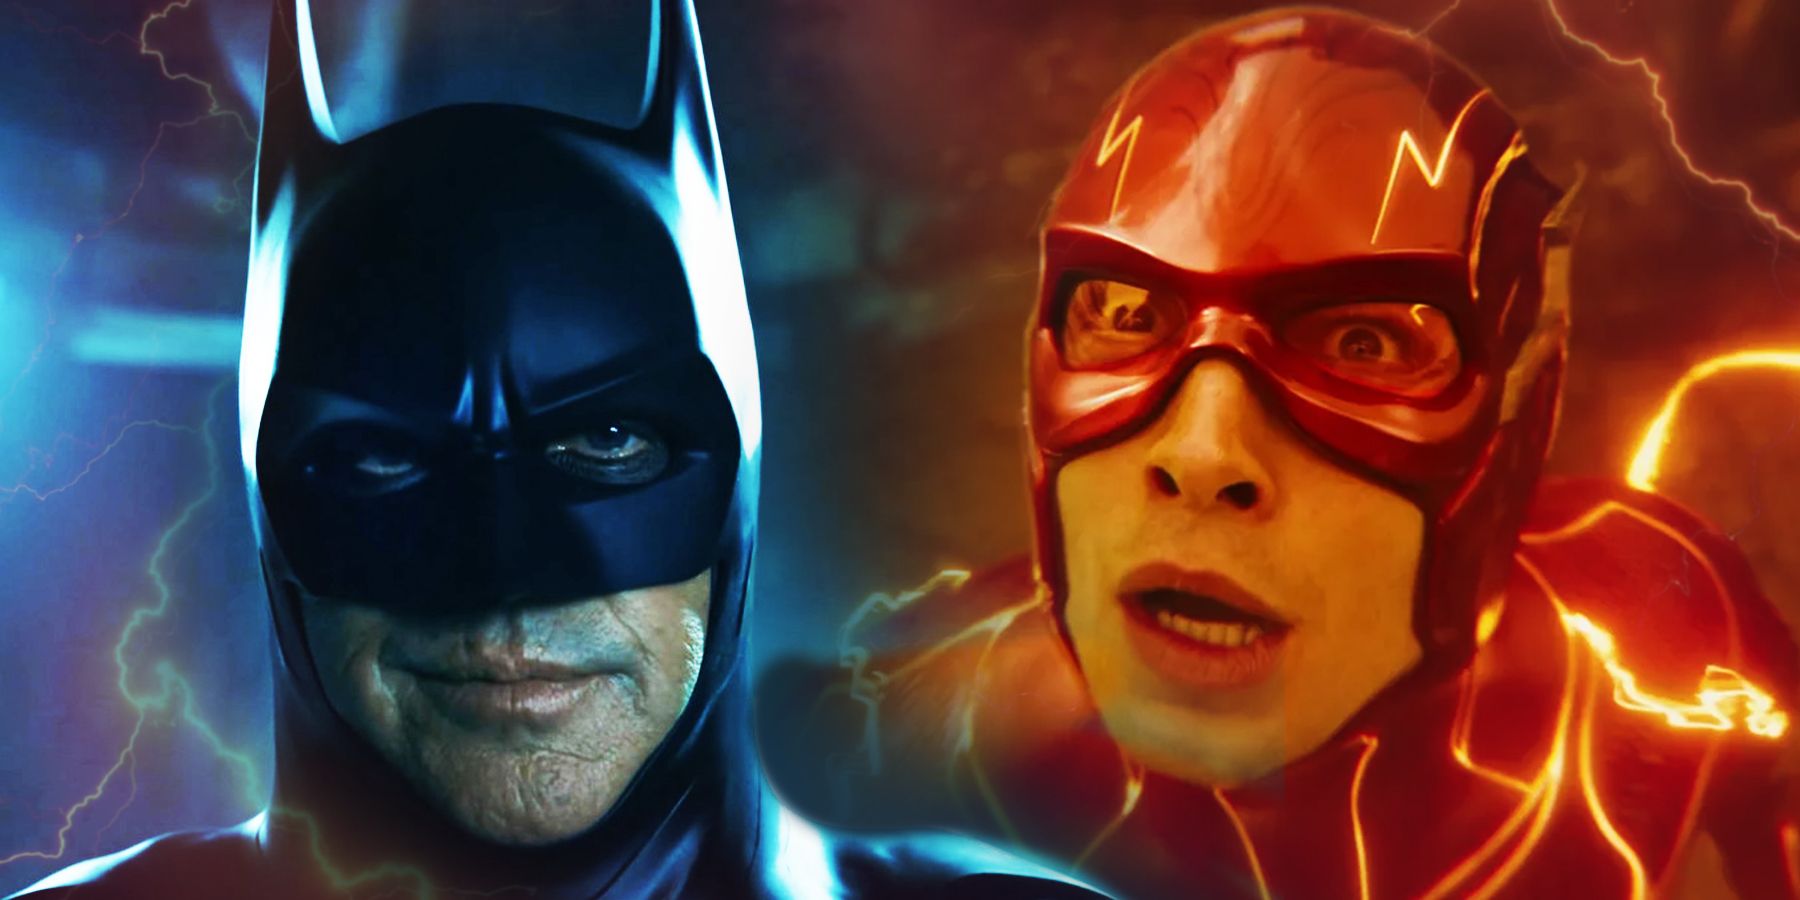 A split image of Michael Keaton as Batman and Ezra Miller as the Flash in The Flash